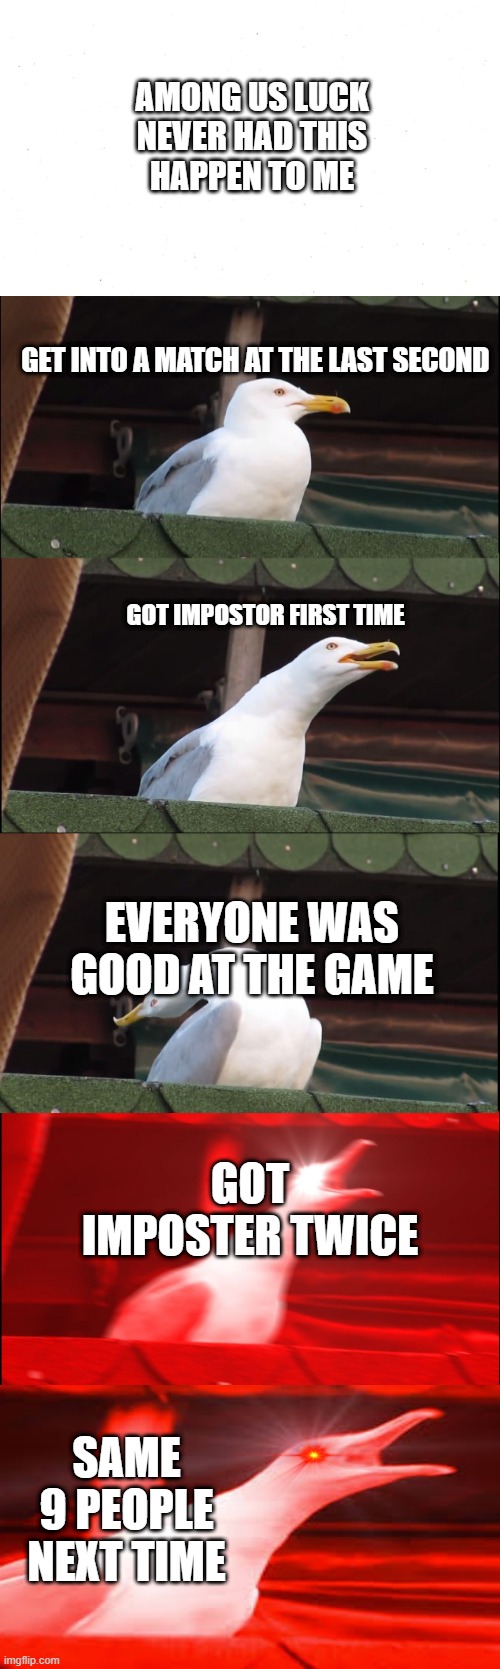 Inhaling Seagull | AMONG US LUCK

NEVER HAD THIS HAPPEN TO ME; GET INTO A MATCH AT THE LAST SECOND; GOT IMPOSTOR FIRST TIME; EVERYONE WAS GOOD AT THE GAME; GOT IMPOSTER TWICE; SAME 9 PEOPLE NEXT TIME | image tagged in memes,inhaling seagull | made w/ Imgflip meme maker